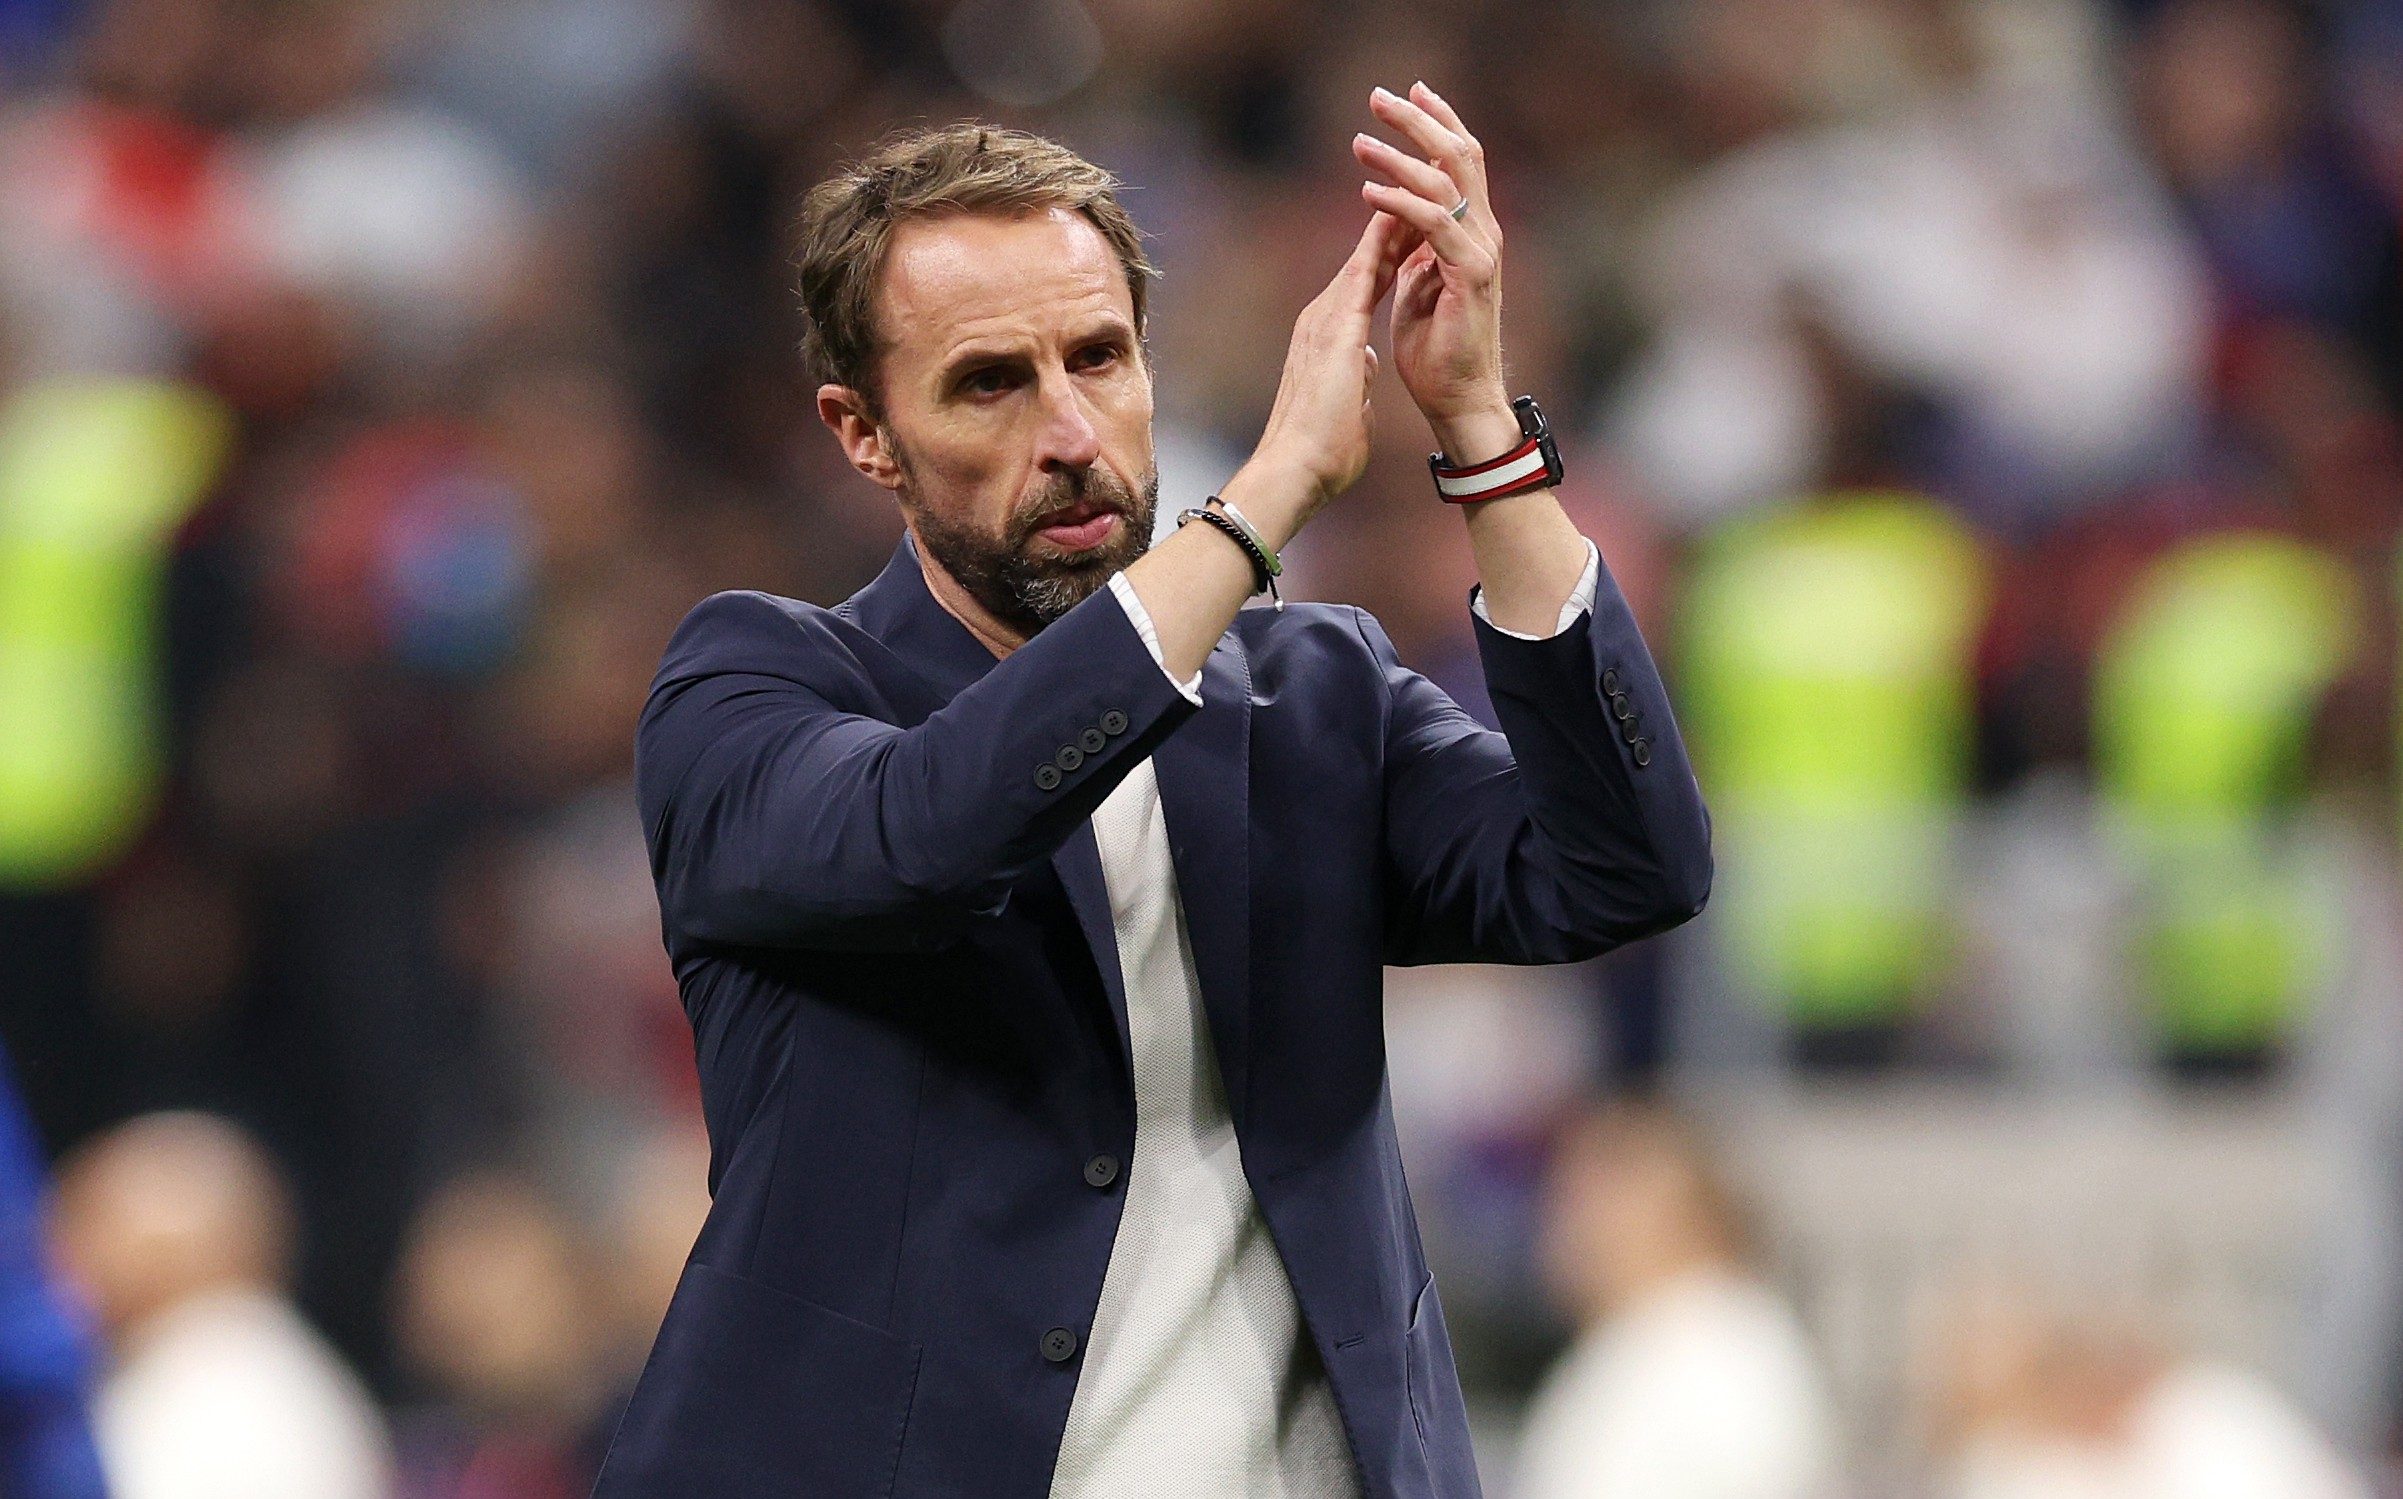 Gareth Southgate Considering England Exit After World Cup Elimination